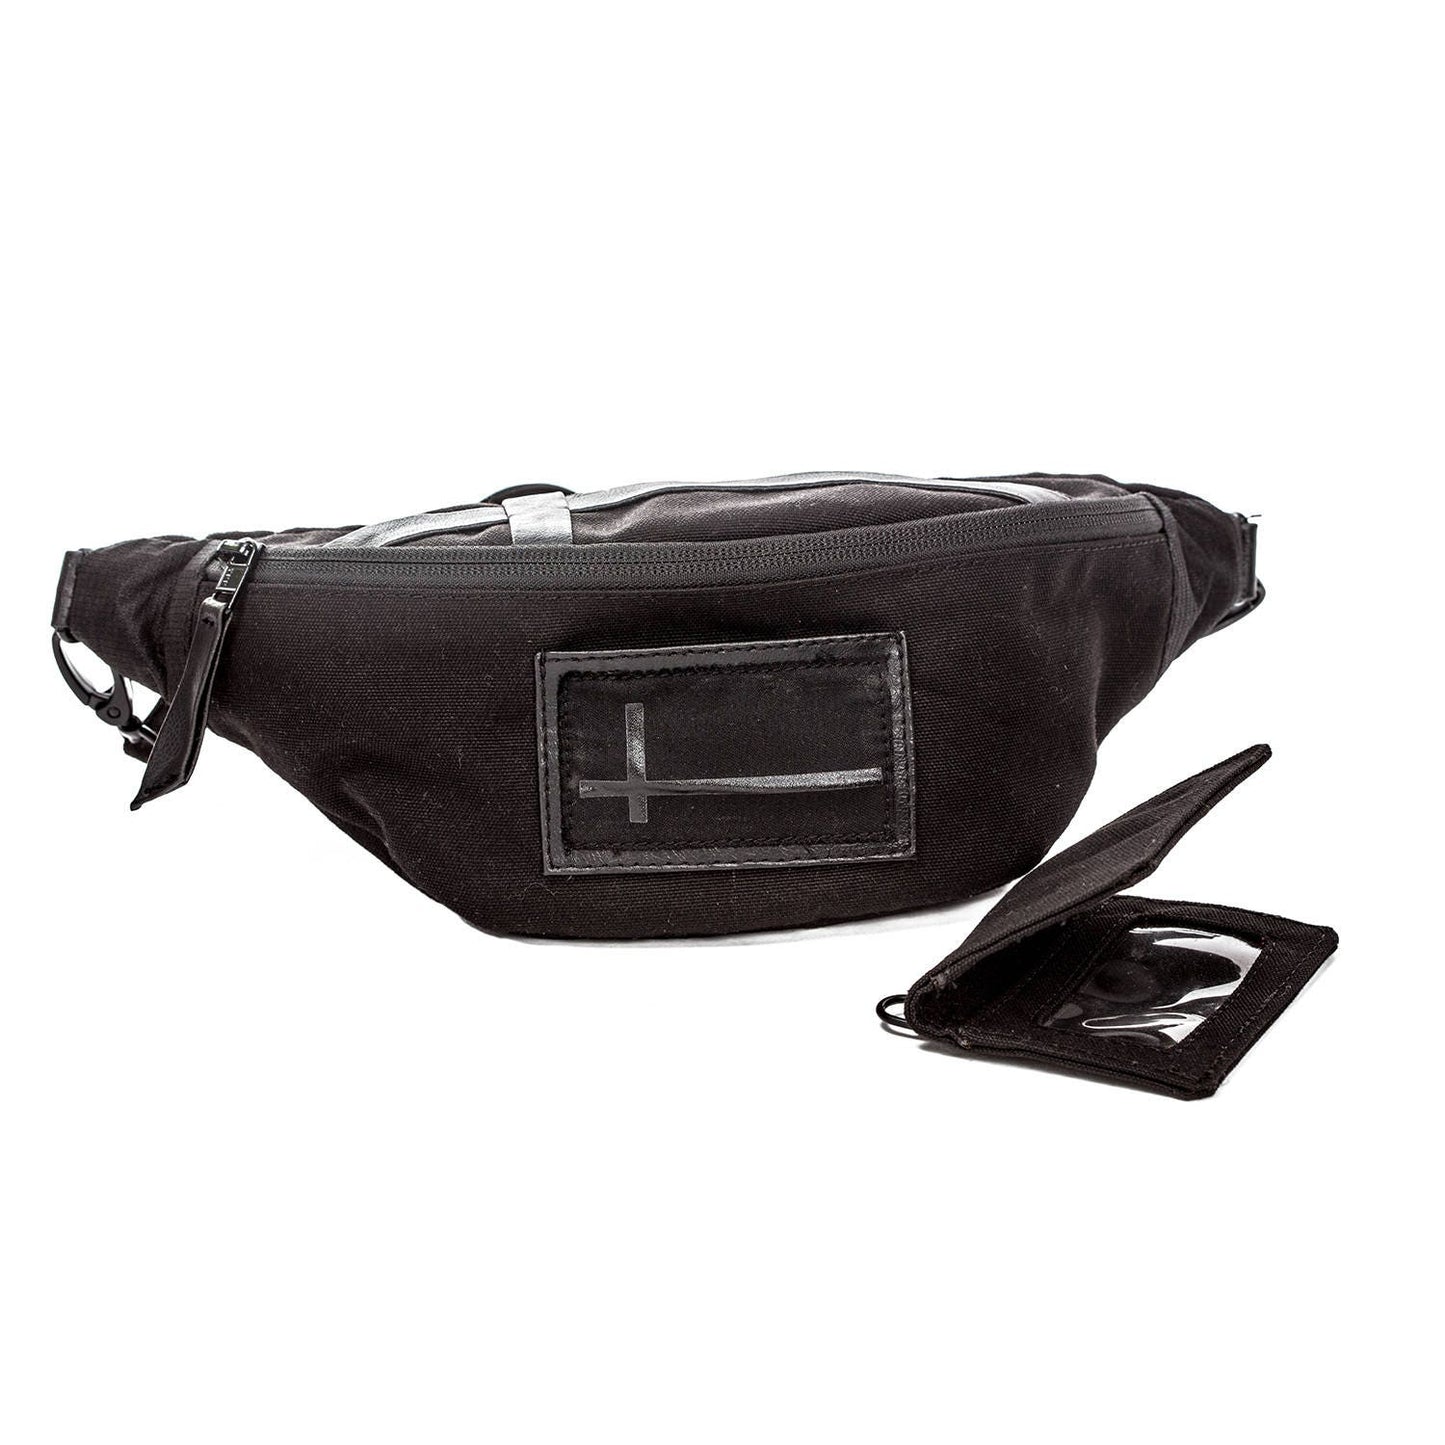 INTERSECTION AGENT Black Canvas Cross Body Mini Messenger Bag and Fanny Pack Passport Holder